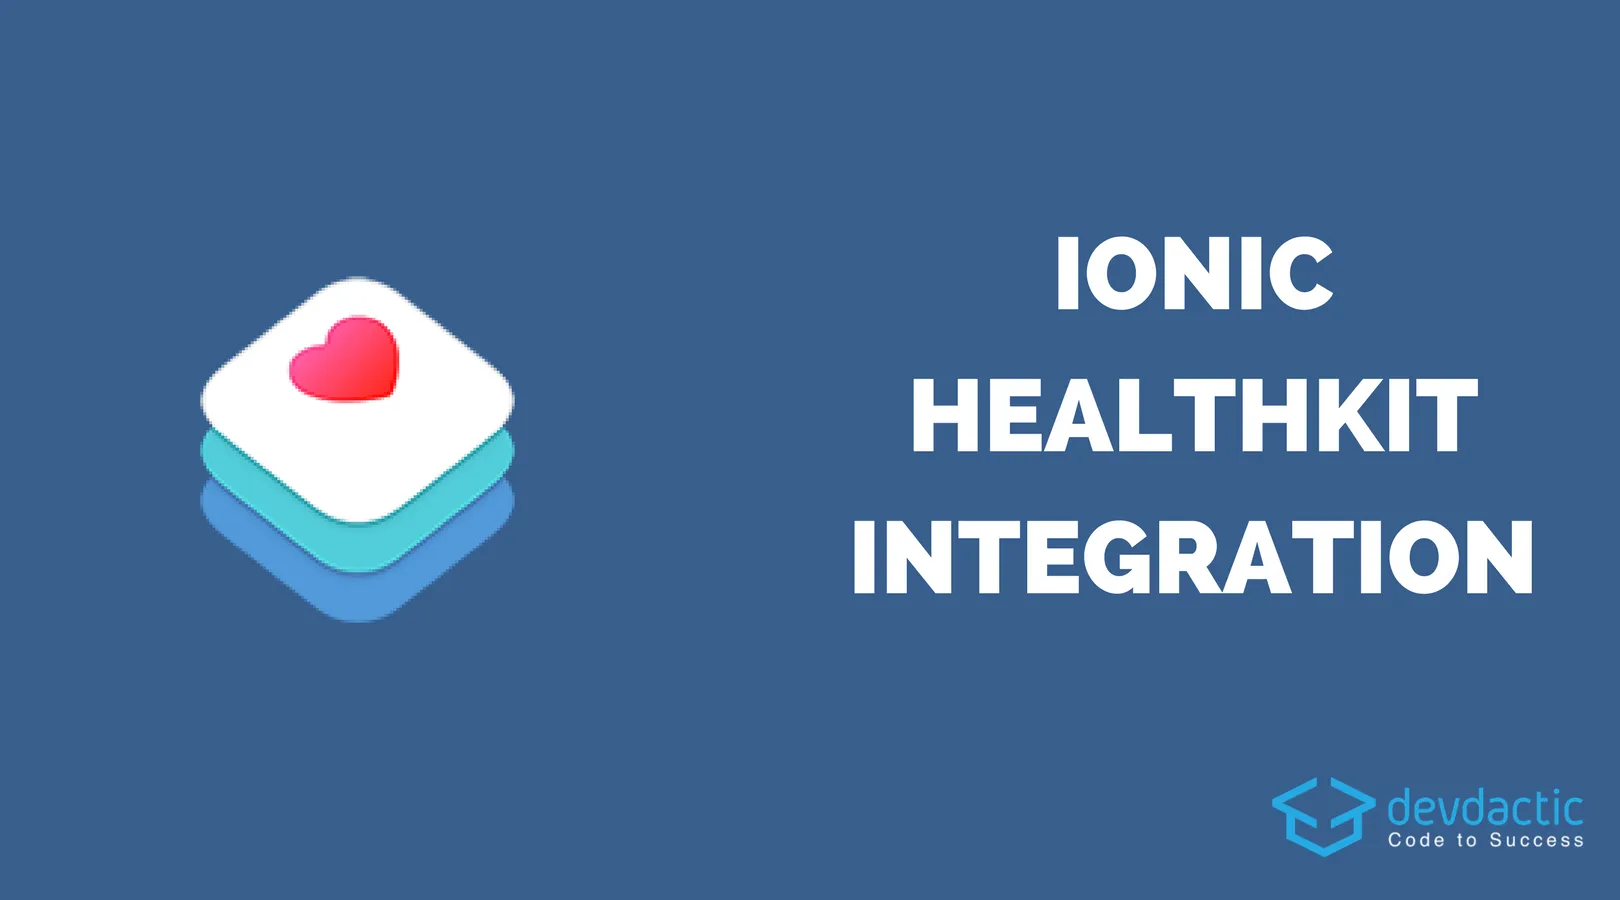 Building an Ionic Fitness App with iOS HealthKit Integration